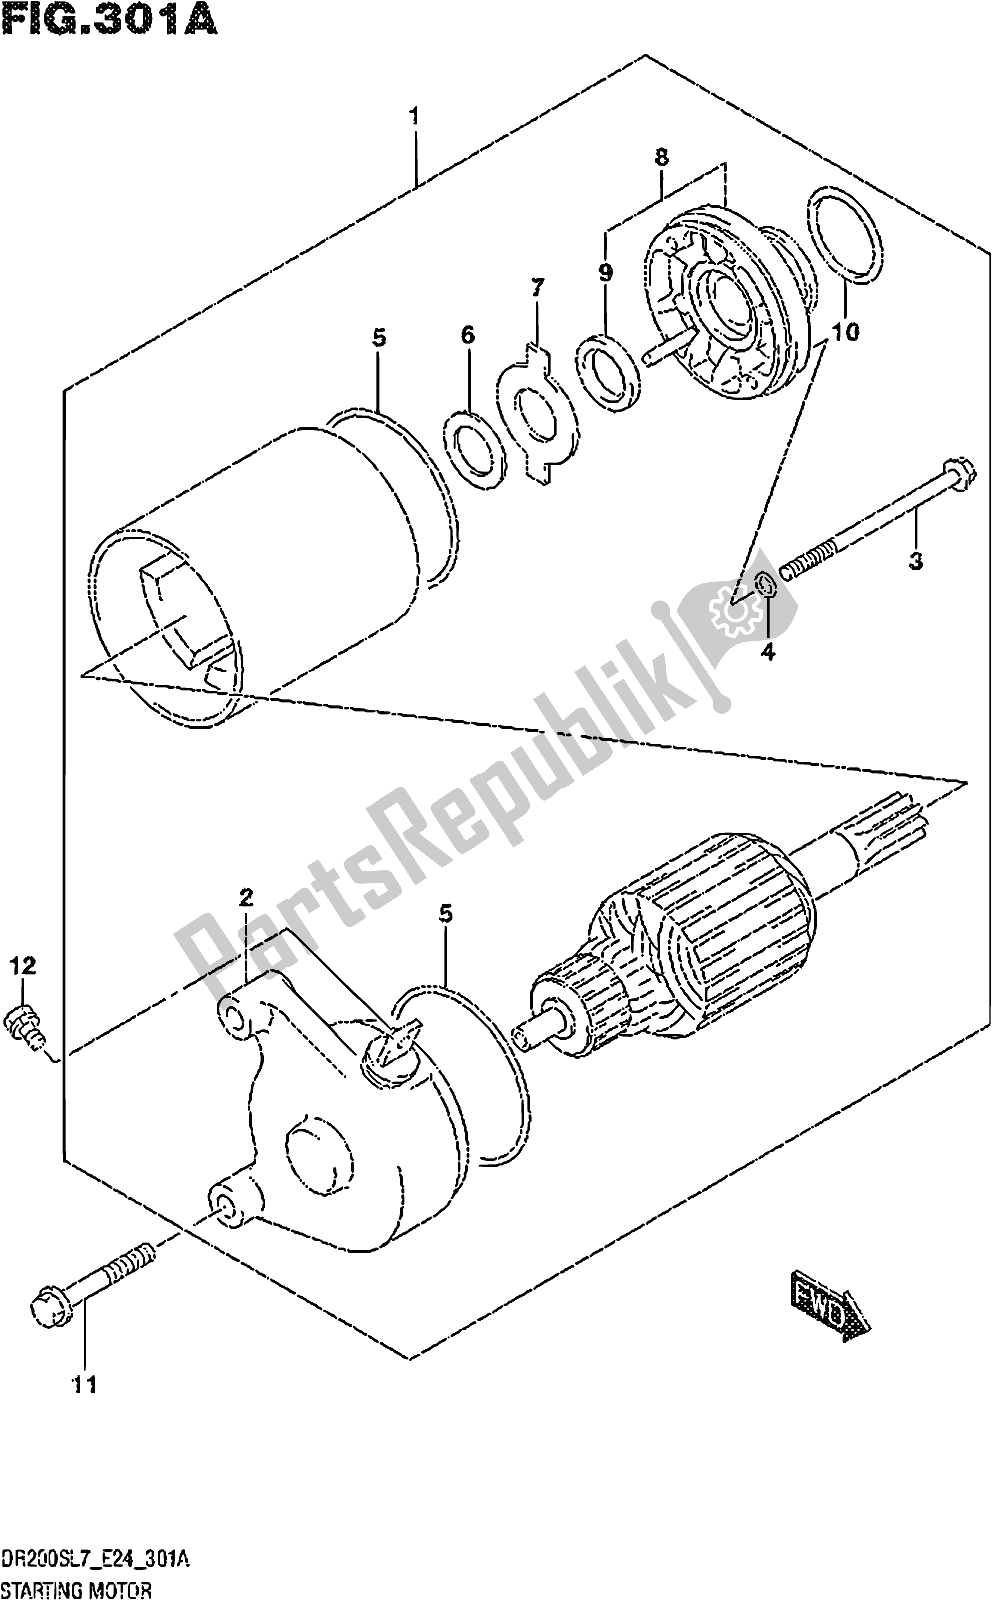 All parts for the Fig. 301a Starting Motor of the Suzuki DR 200S 2017